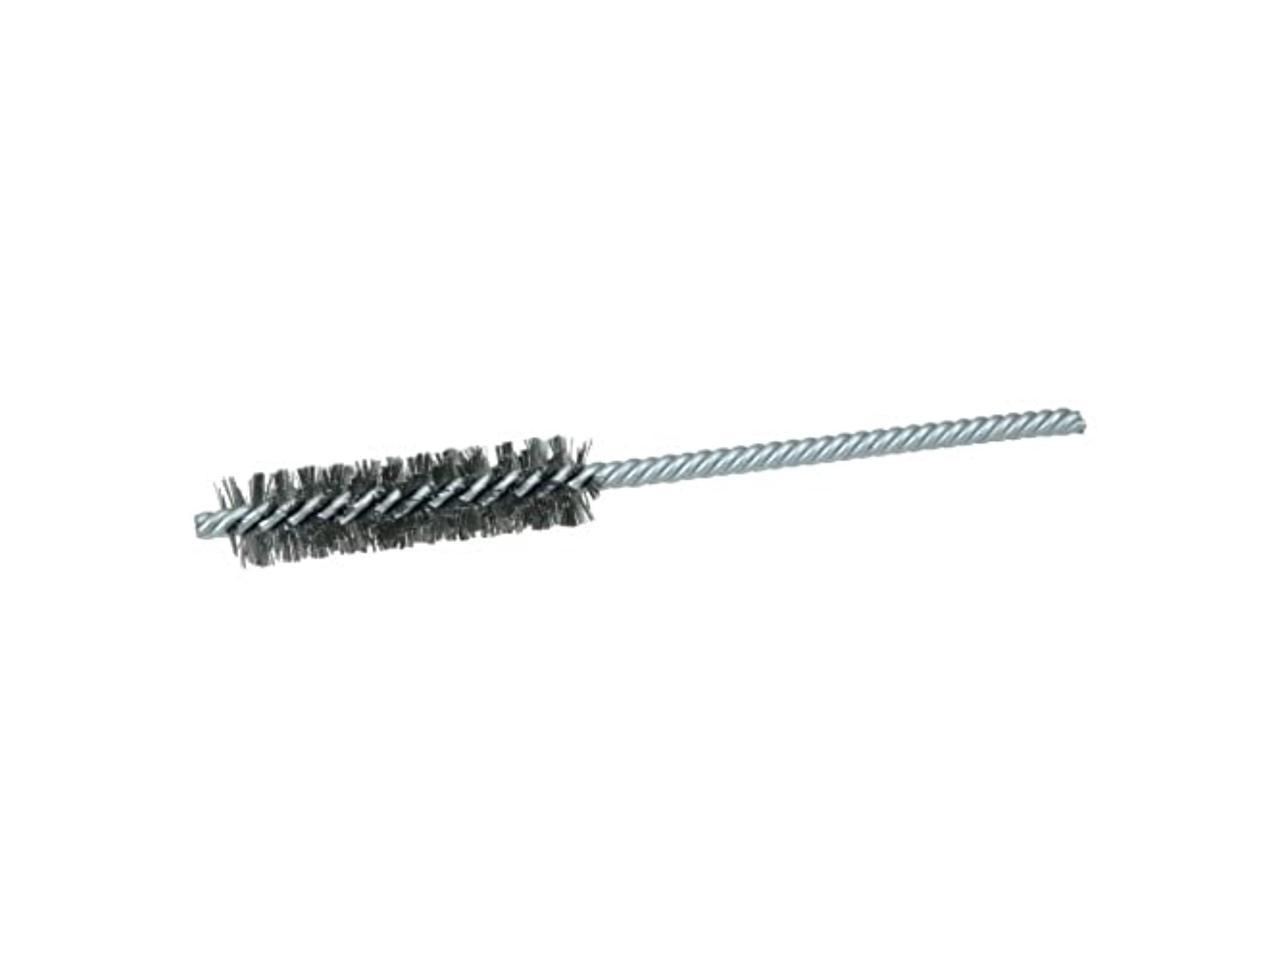 Mill-Rose 61321 Millrose Good Quality Plumbing with 3/4 Fitting Brush 